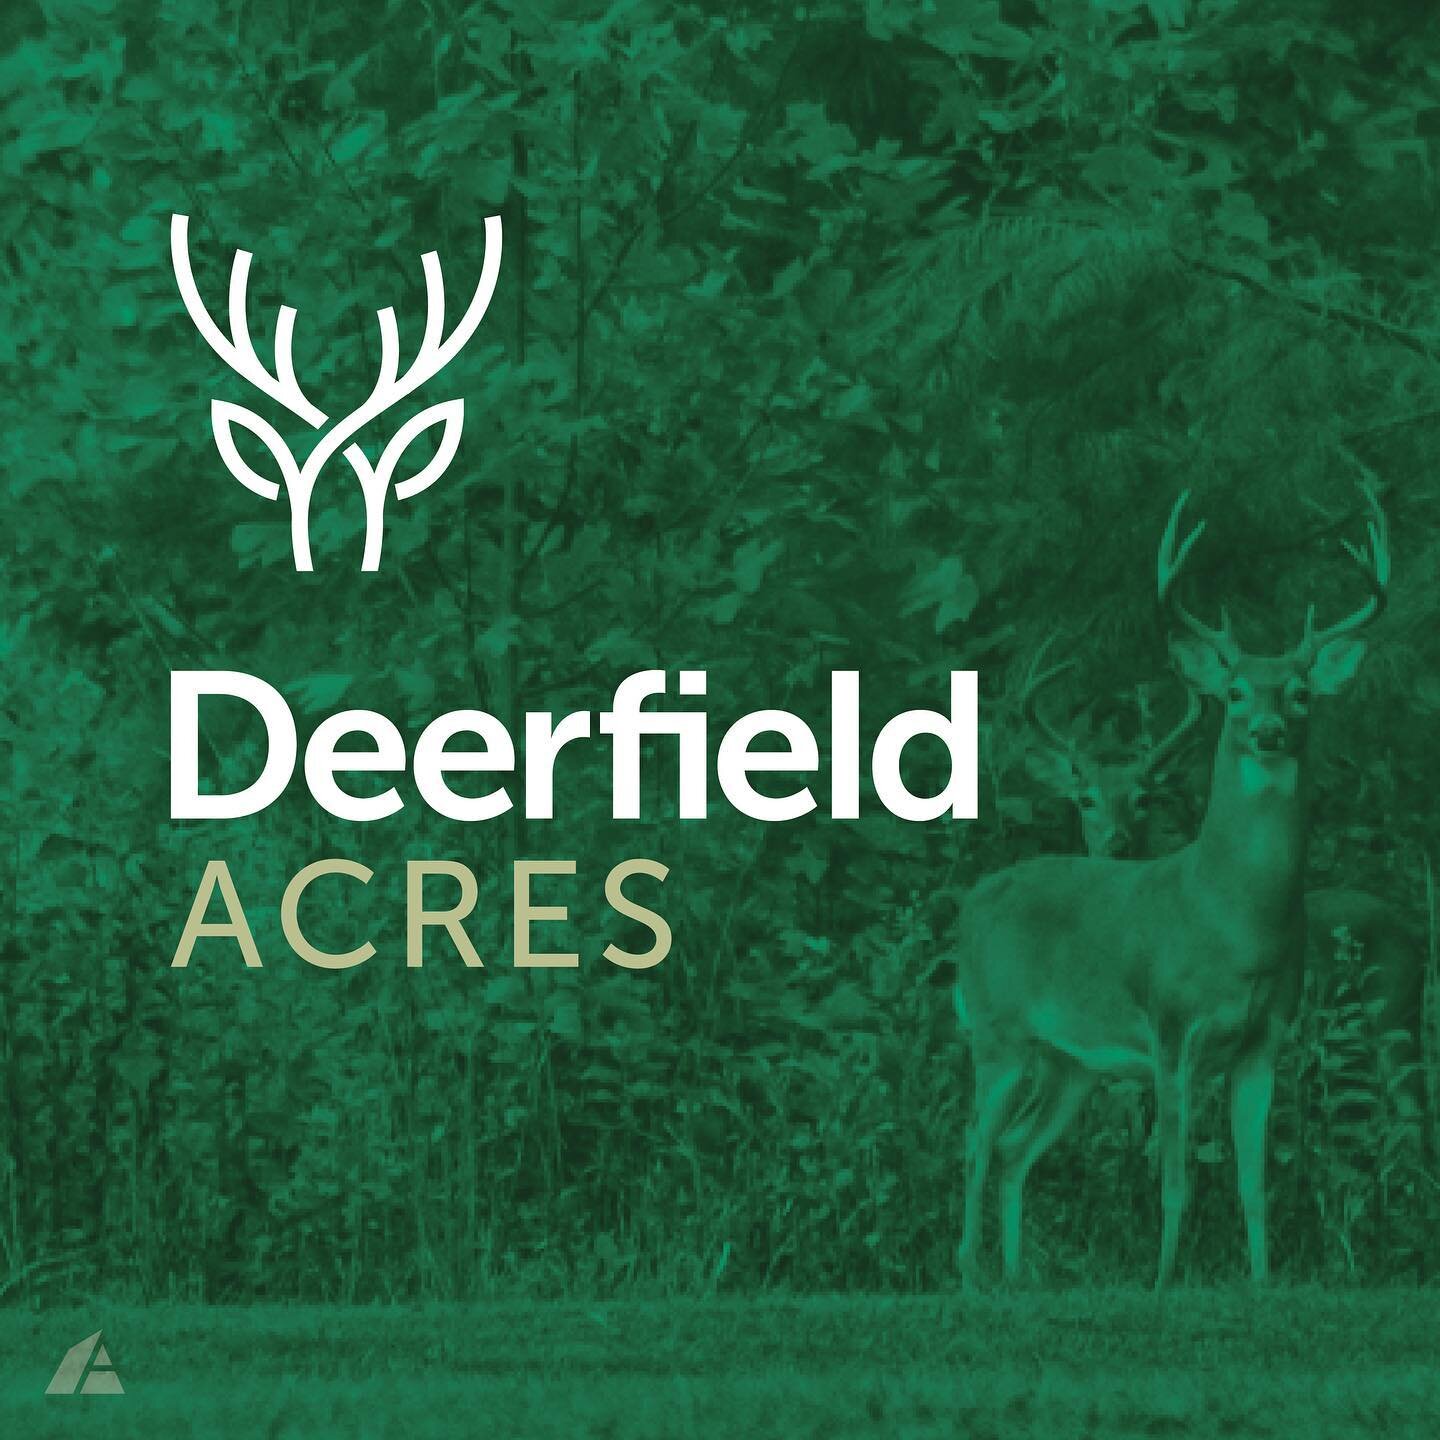 Deerfield Acres. Art direction and design. Identity, brand, direct, print, collateral, p.o.p., social. @christian_papist at The A-Frame. 
.
.
.
#design #designer #graphicdesign #graphicdesigner&nbsp;#layoutdesign #artdirection #artdirector  #branding